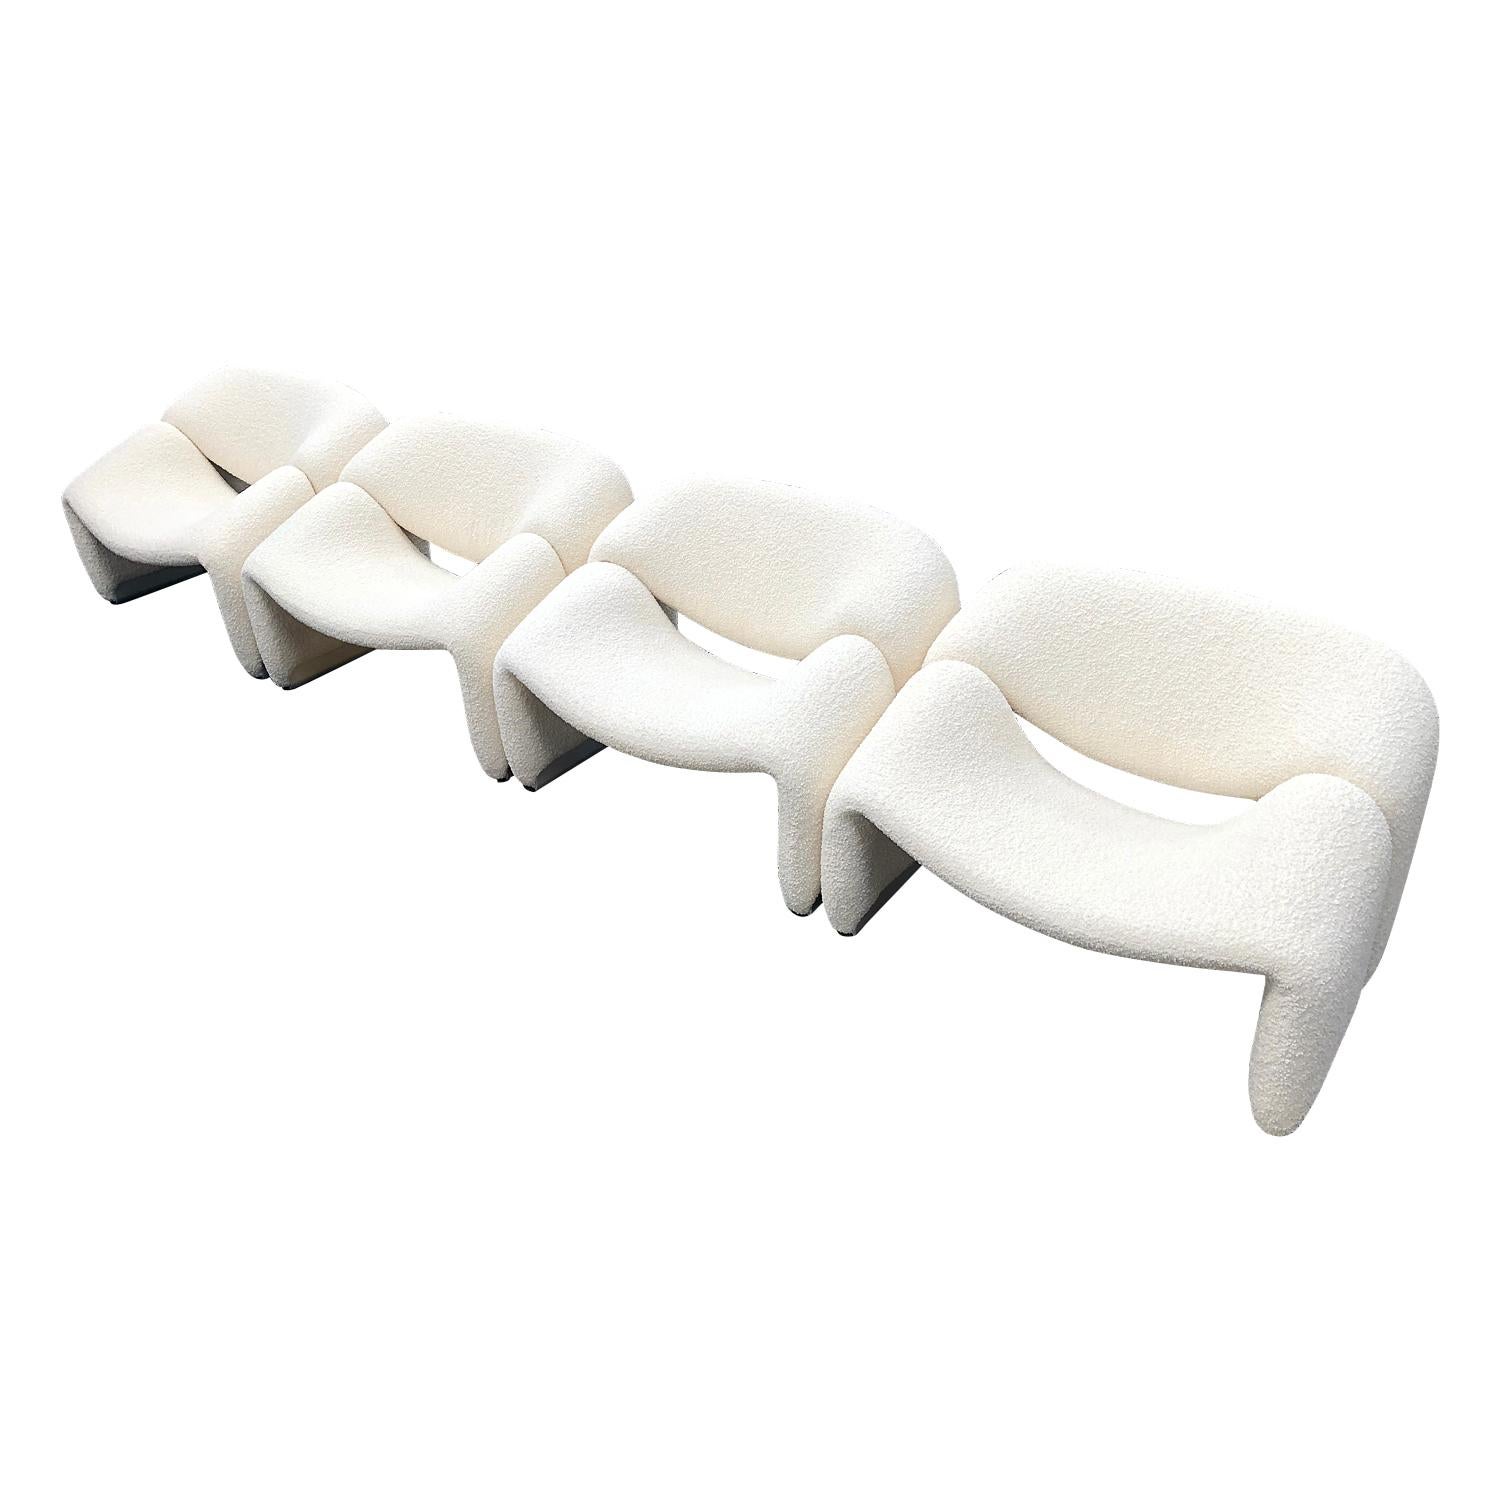 Pair of f598 ‘Groovy’ 'M' lounge chairs by Pierre Paulin for Artifort – Netherlands, 1972.

Price is per chair

The chairs have been new upholstered in a beautiful off-white bouclé wool fabric from Paris. 
Feet colours available in black, white